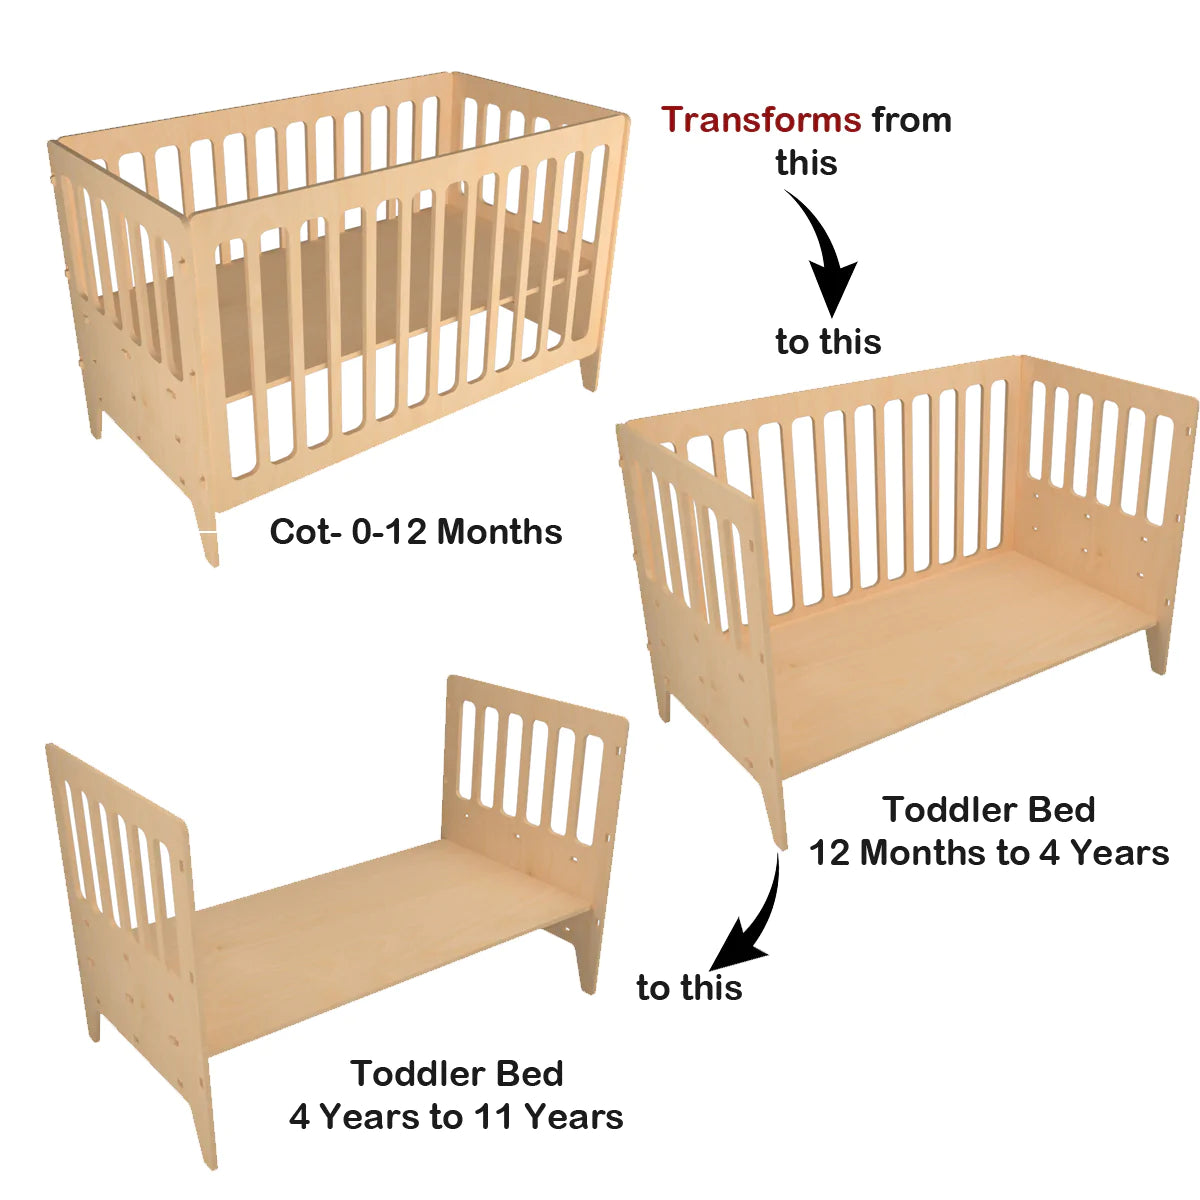 Buy Large Gold Cherry Wooden Crib - Instructions - SkilloToys.com